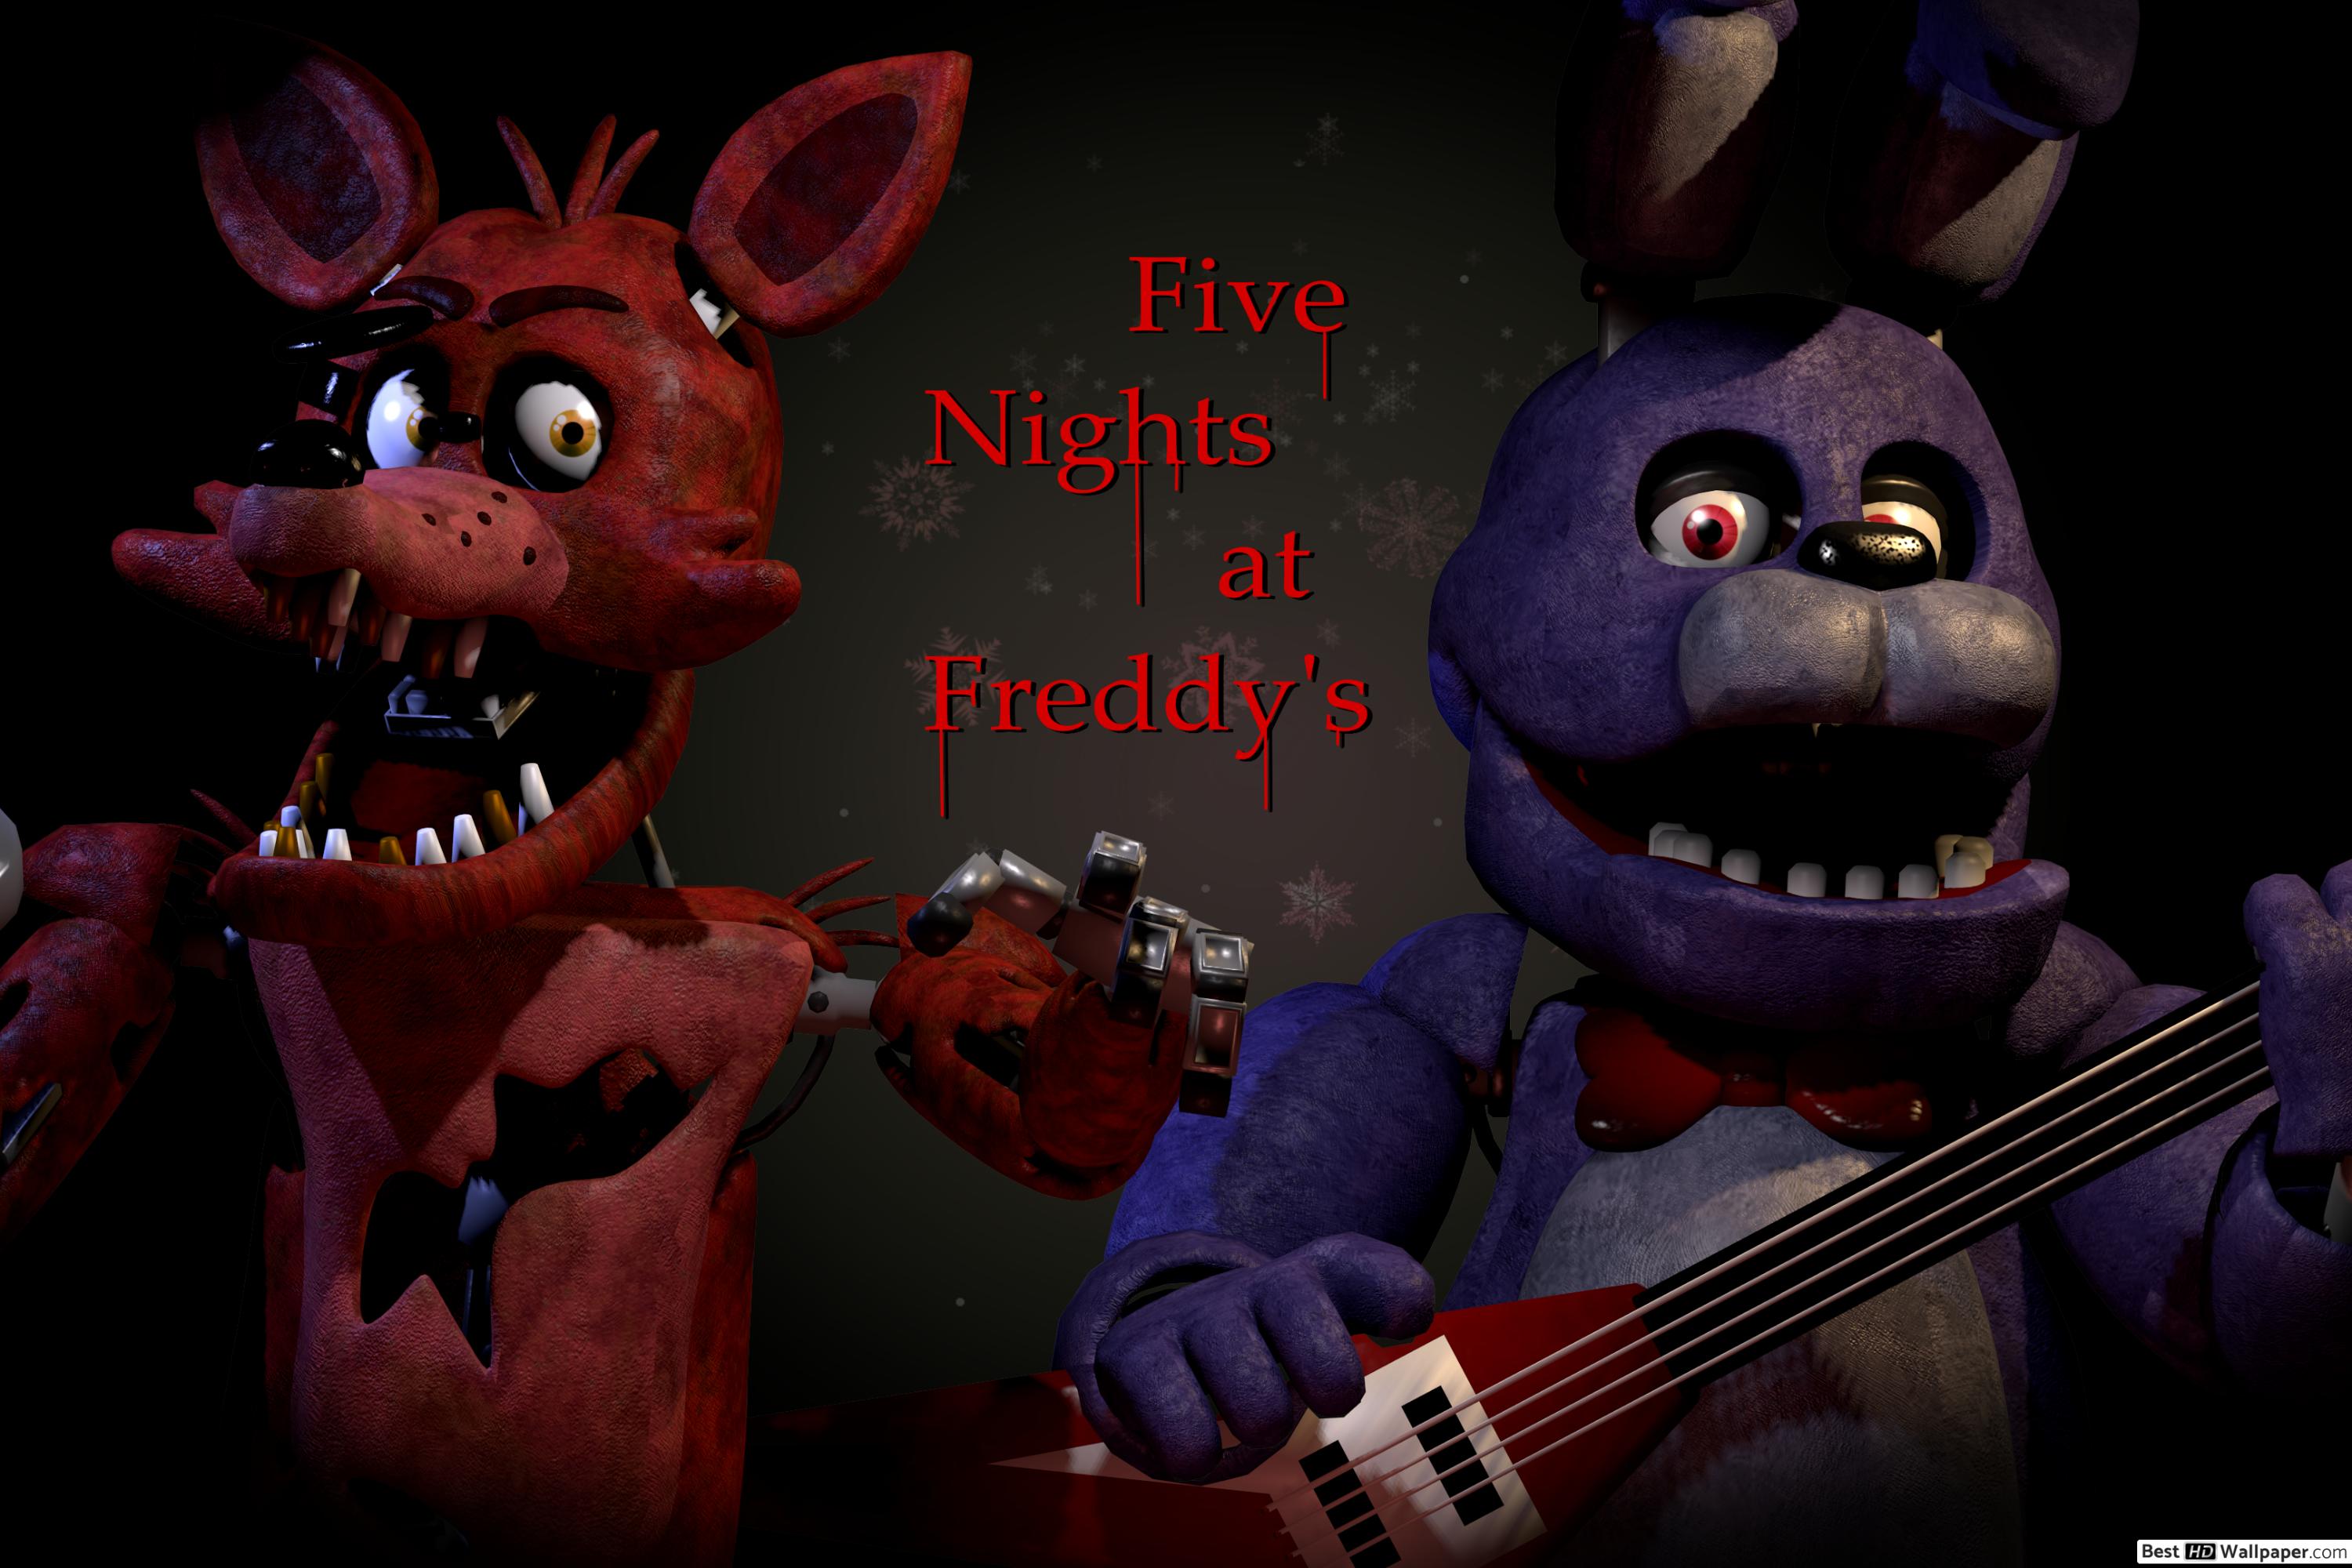 Bonnie And Foxy Of Five Nights At Freddy S Hd Wallpaper - Foxy And Bonnie - HD Wallpaper 